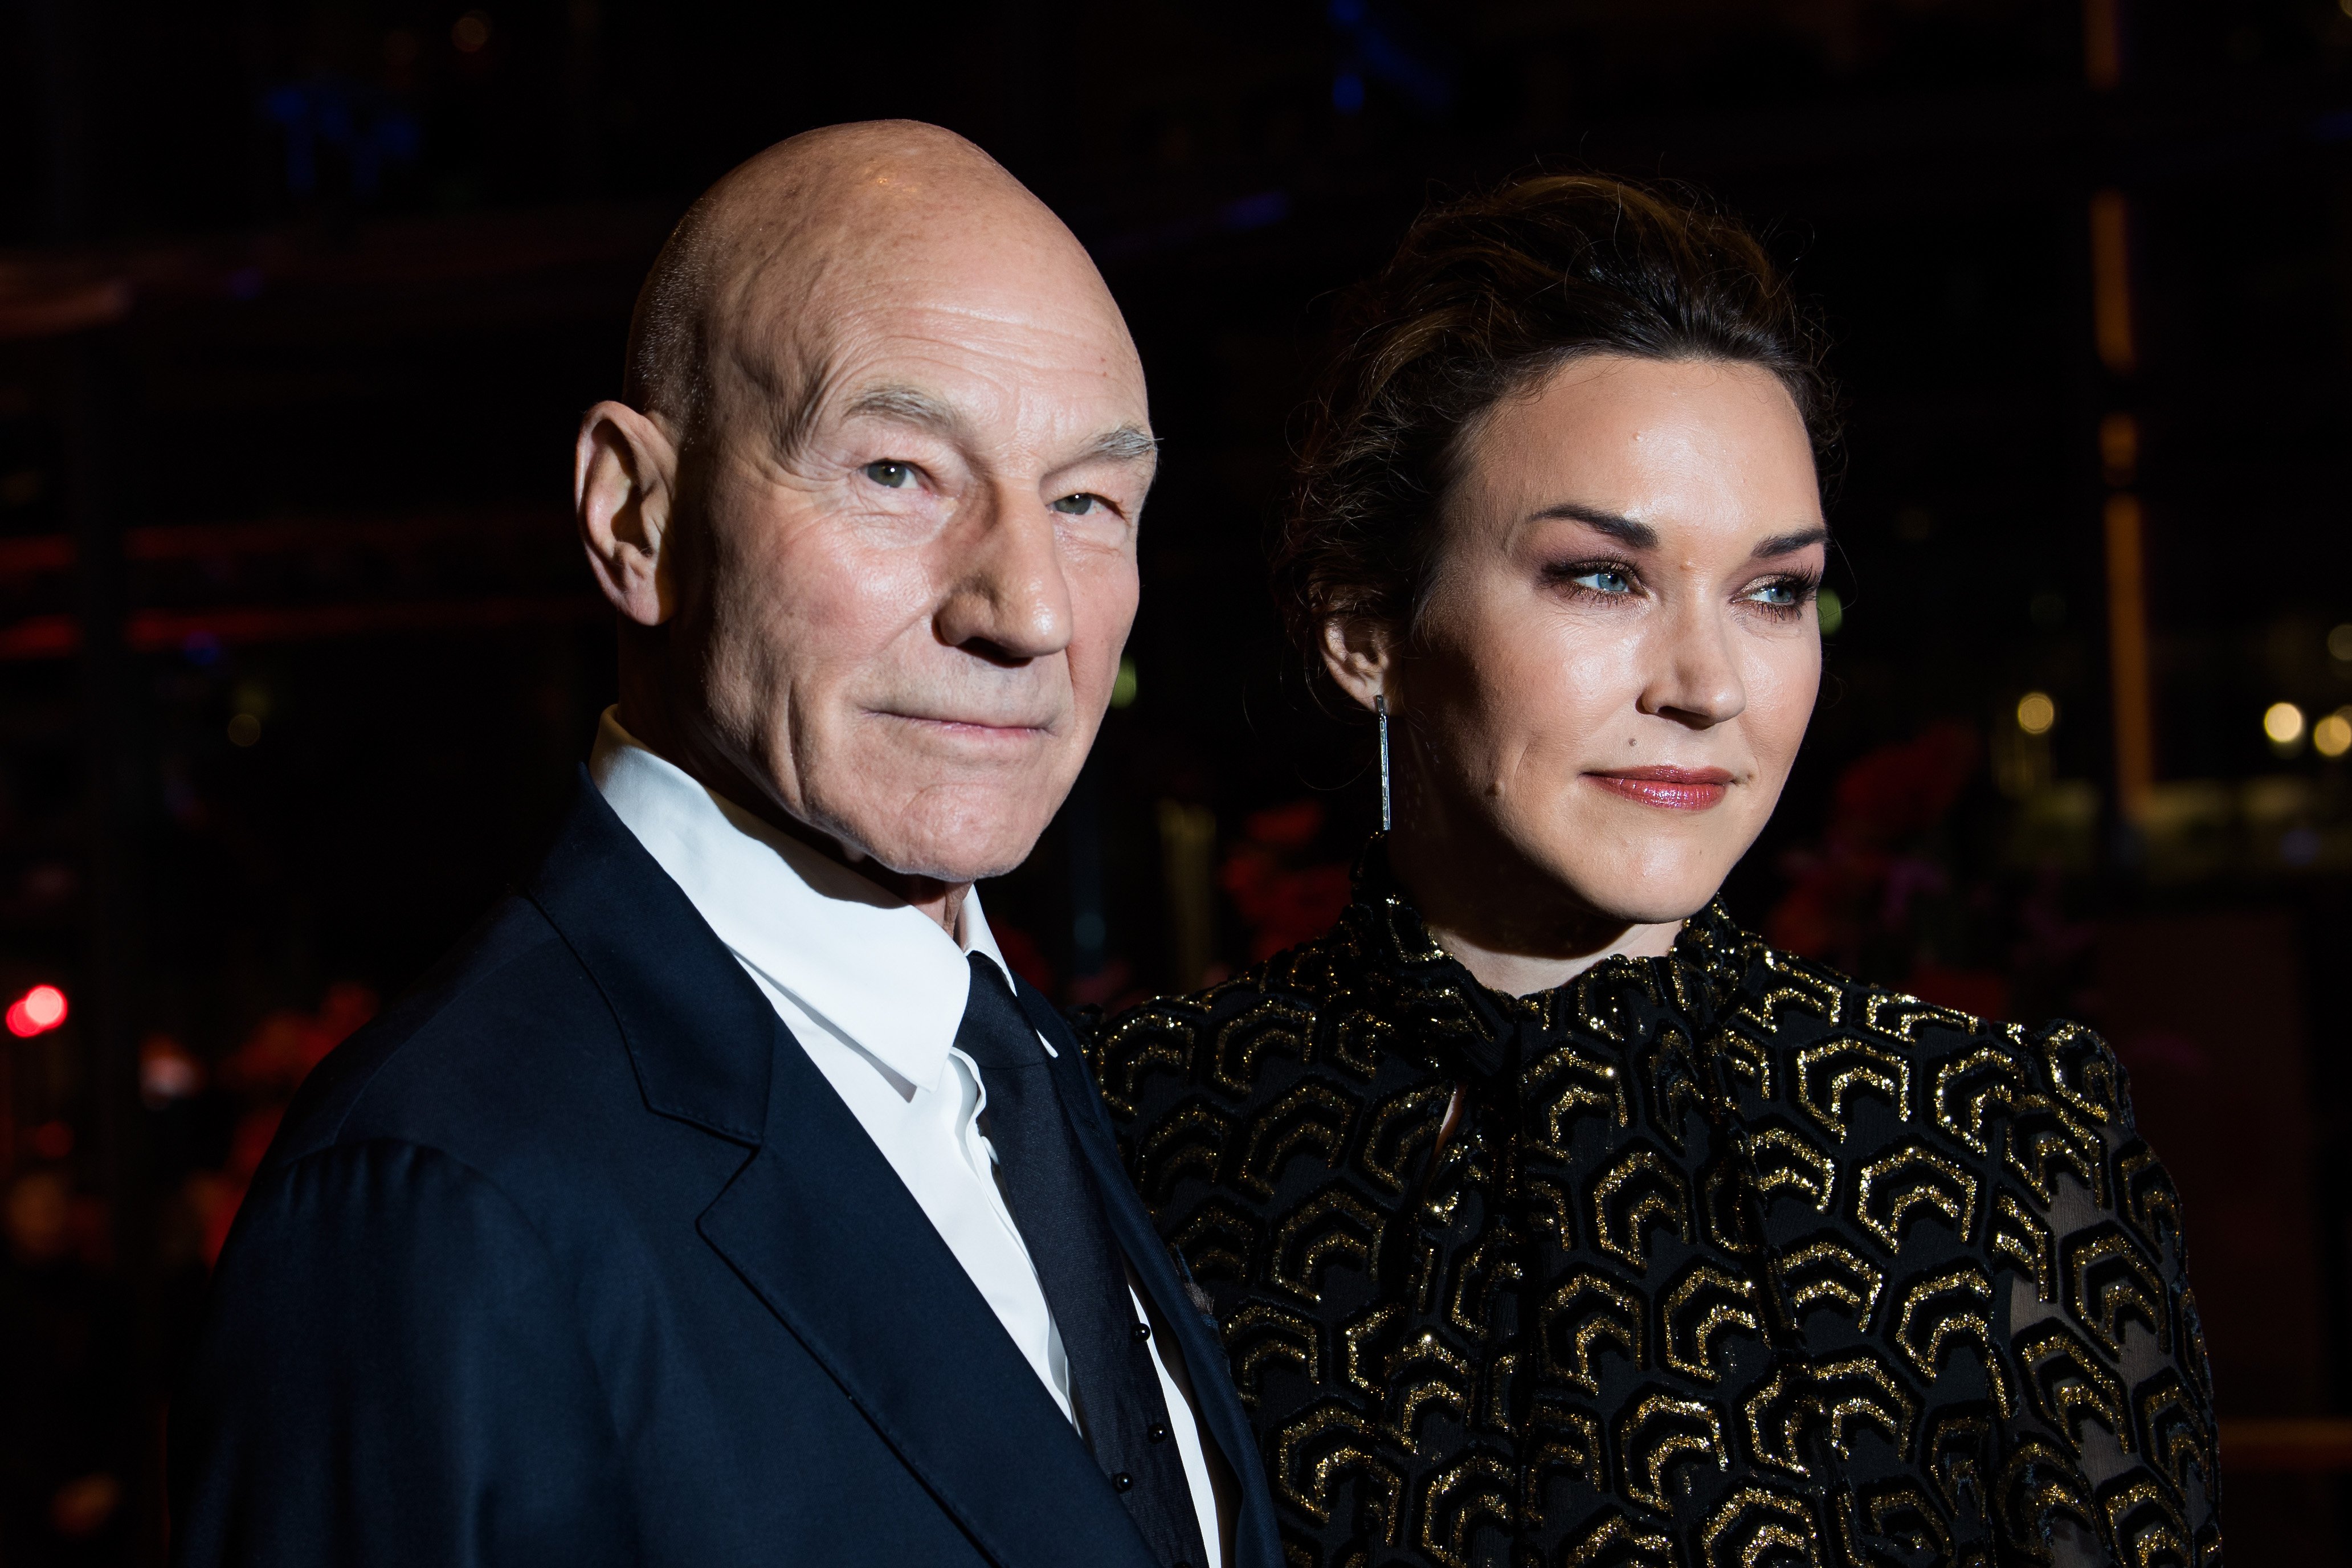 Patrick Stewart and Sunny Ozel at the 67th Berlinale International Film Festival premiere of 'Logan' in 2017 in Berlin, Germany. | Source: Getty Images